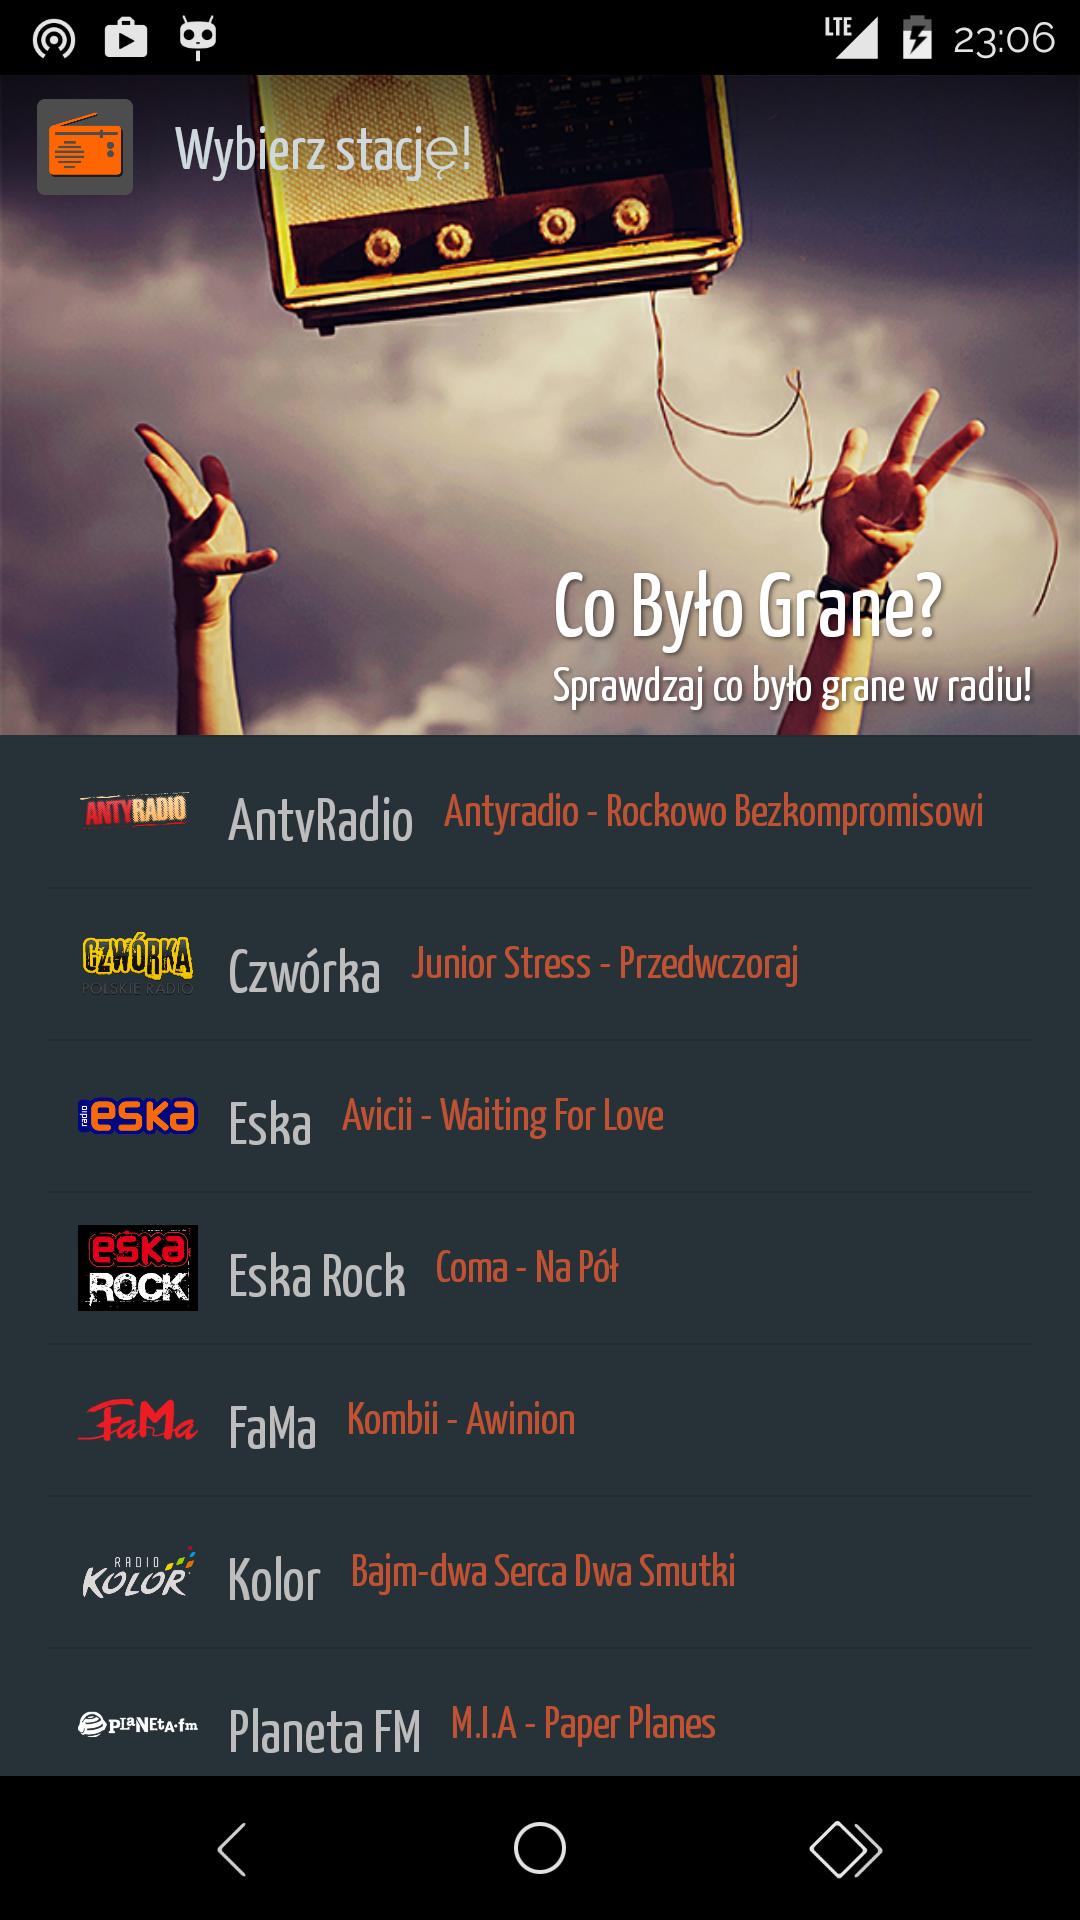 Co Było Grane? for Android - APK Download